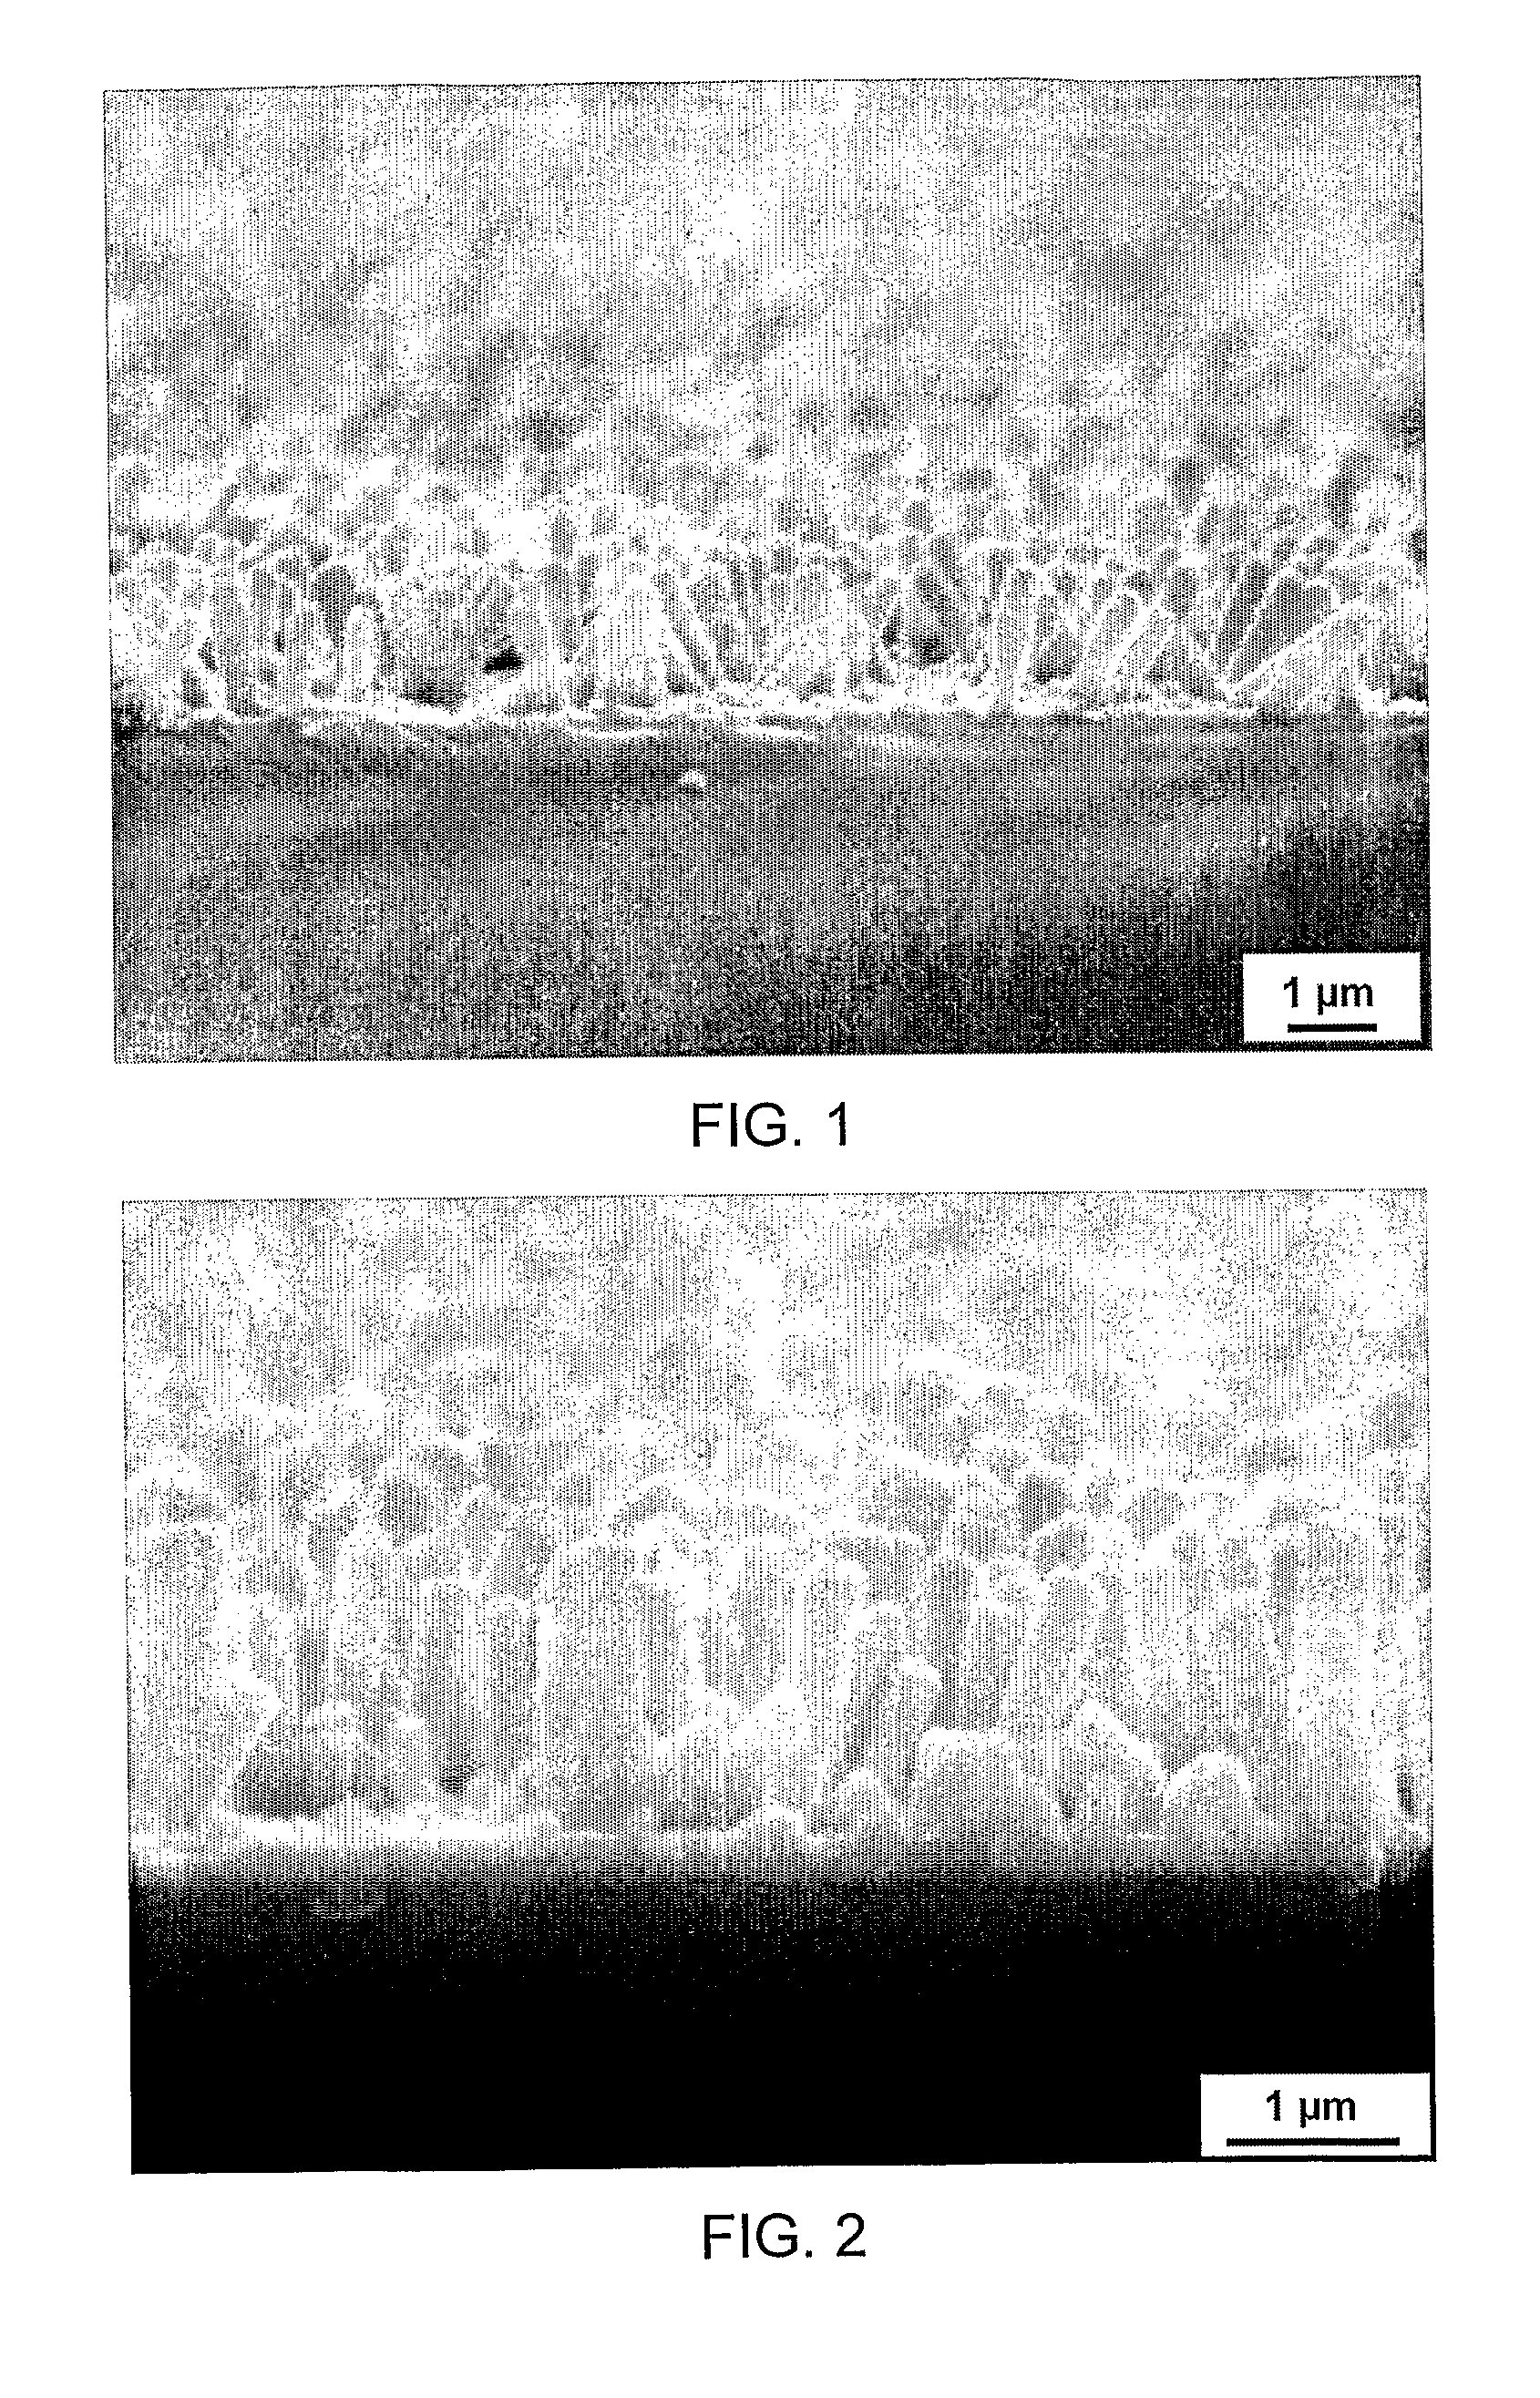 Method of Preparing Zinc Oxide Nanorods on a Substrate By Chemical Spray Pyrolysis